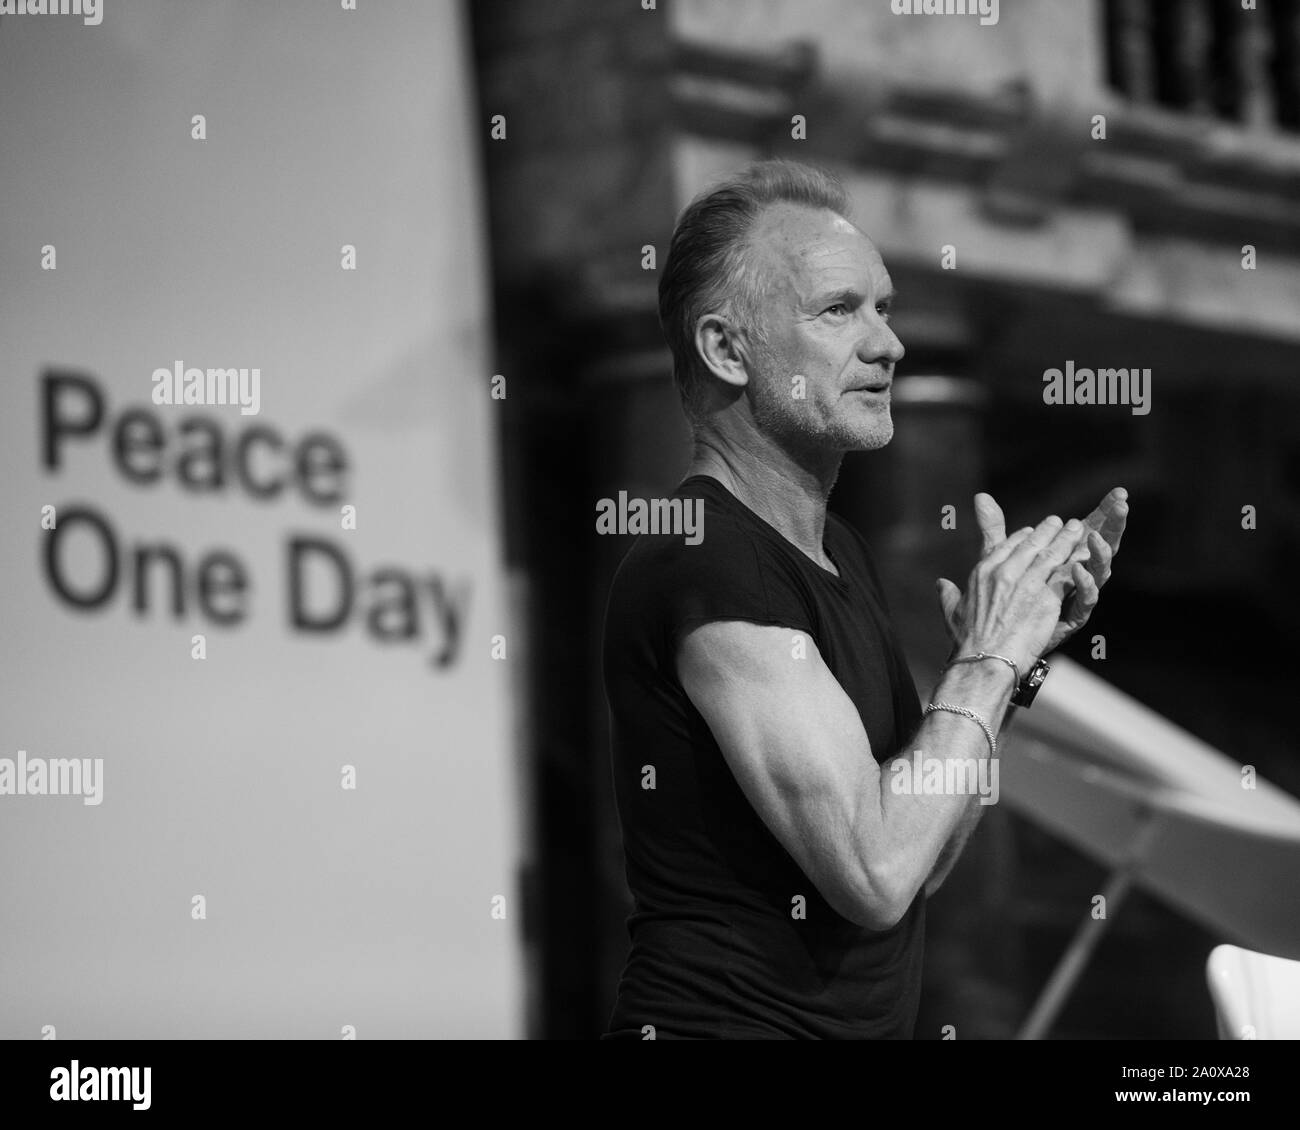 Peace One Day Concert 2019 - Sting Performs to close the 20 year celebration - 'Who will you make your peace with?' Stock Photo